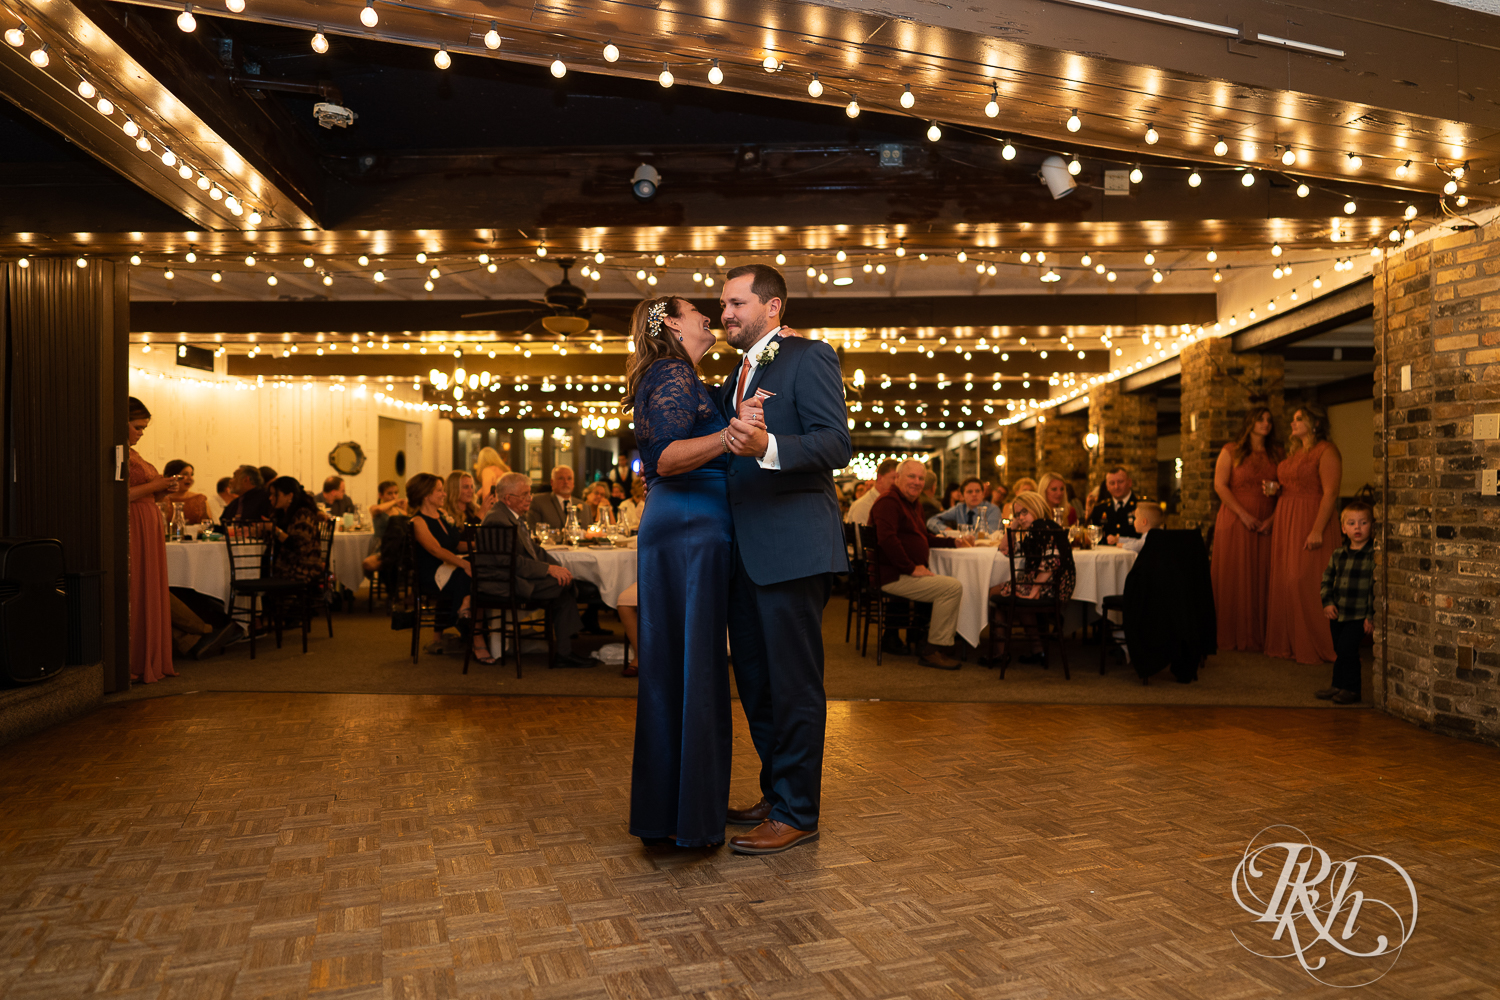 Mother and groom dance during wedding reception at The Chart House in Lakeville, Minnesota.